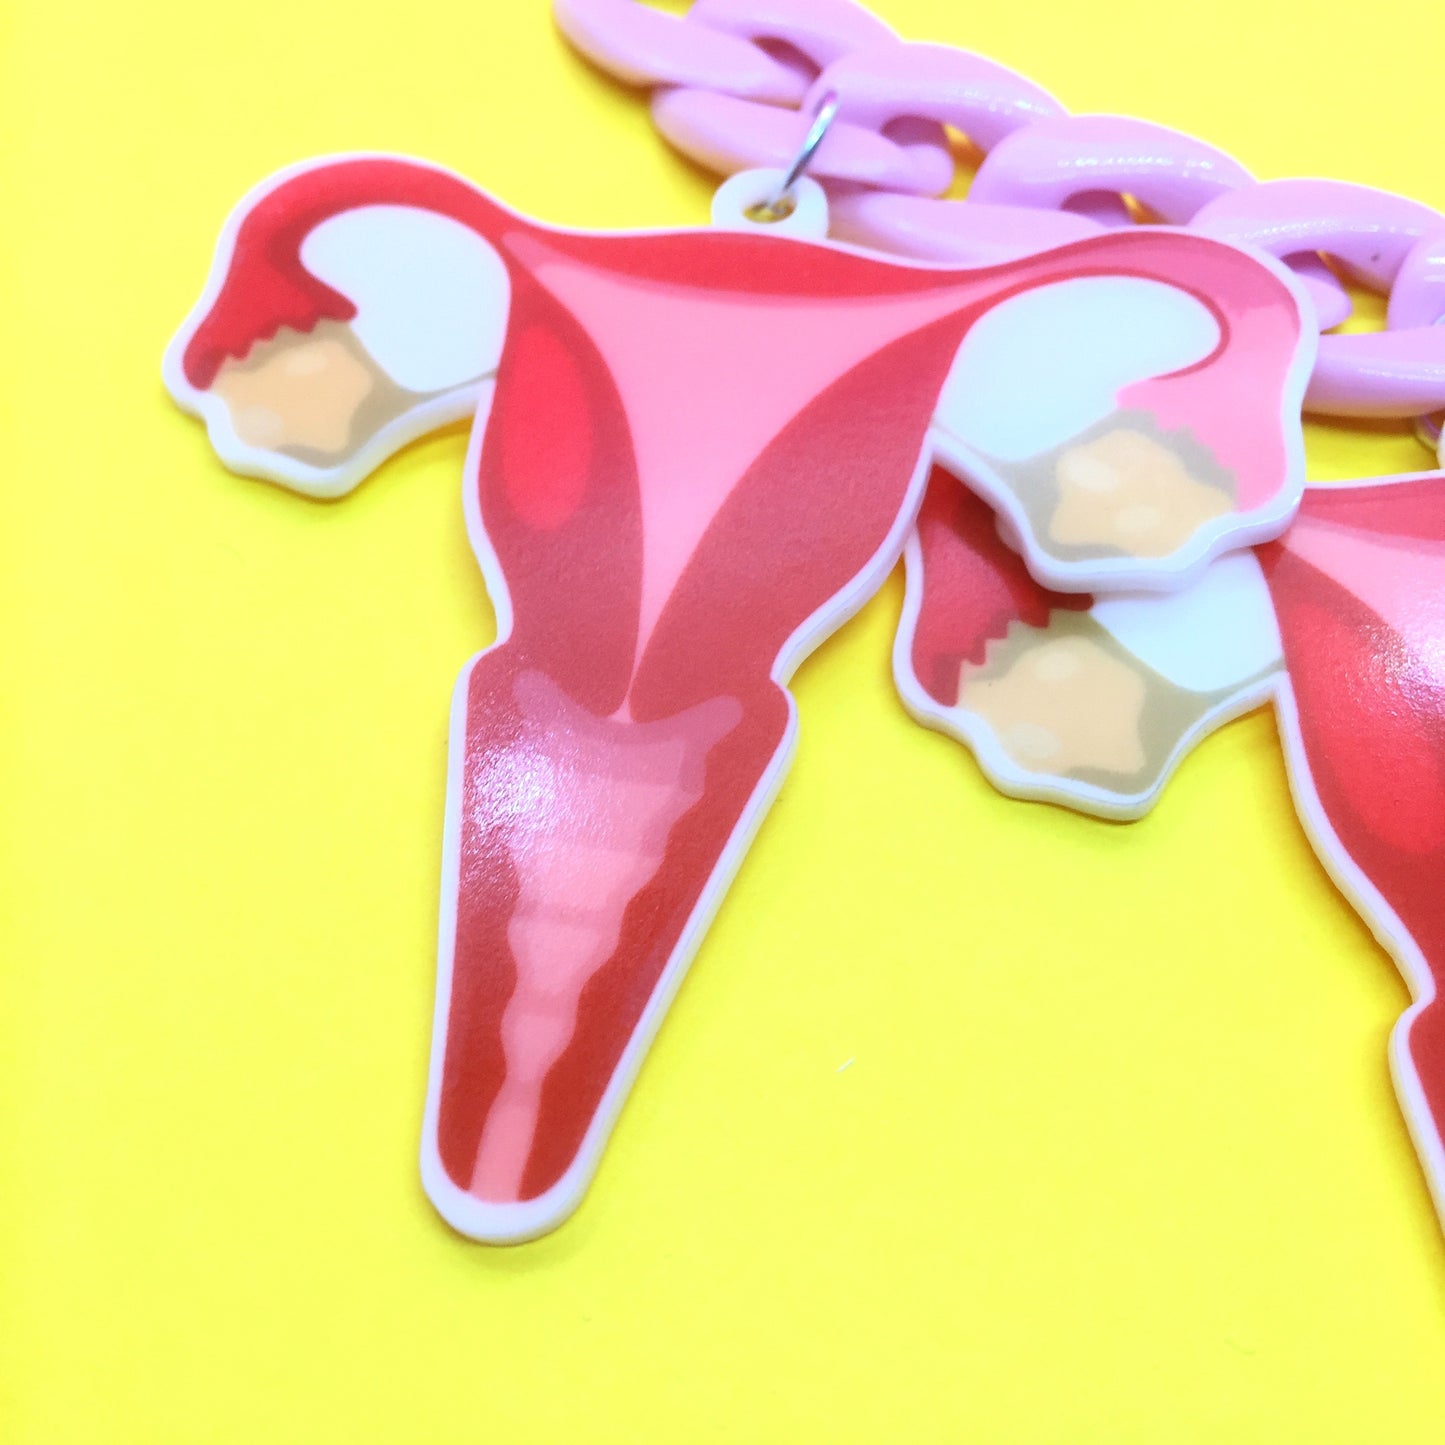 Uterus Necklace and Earrings